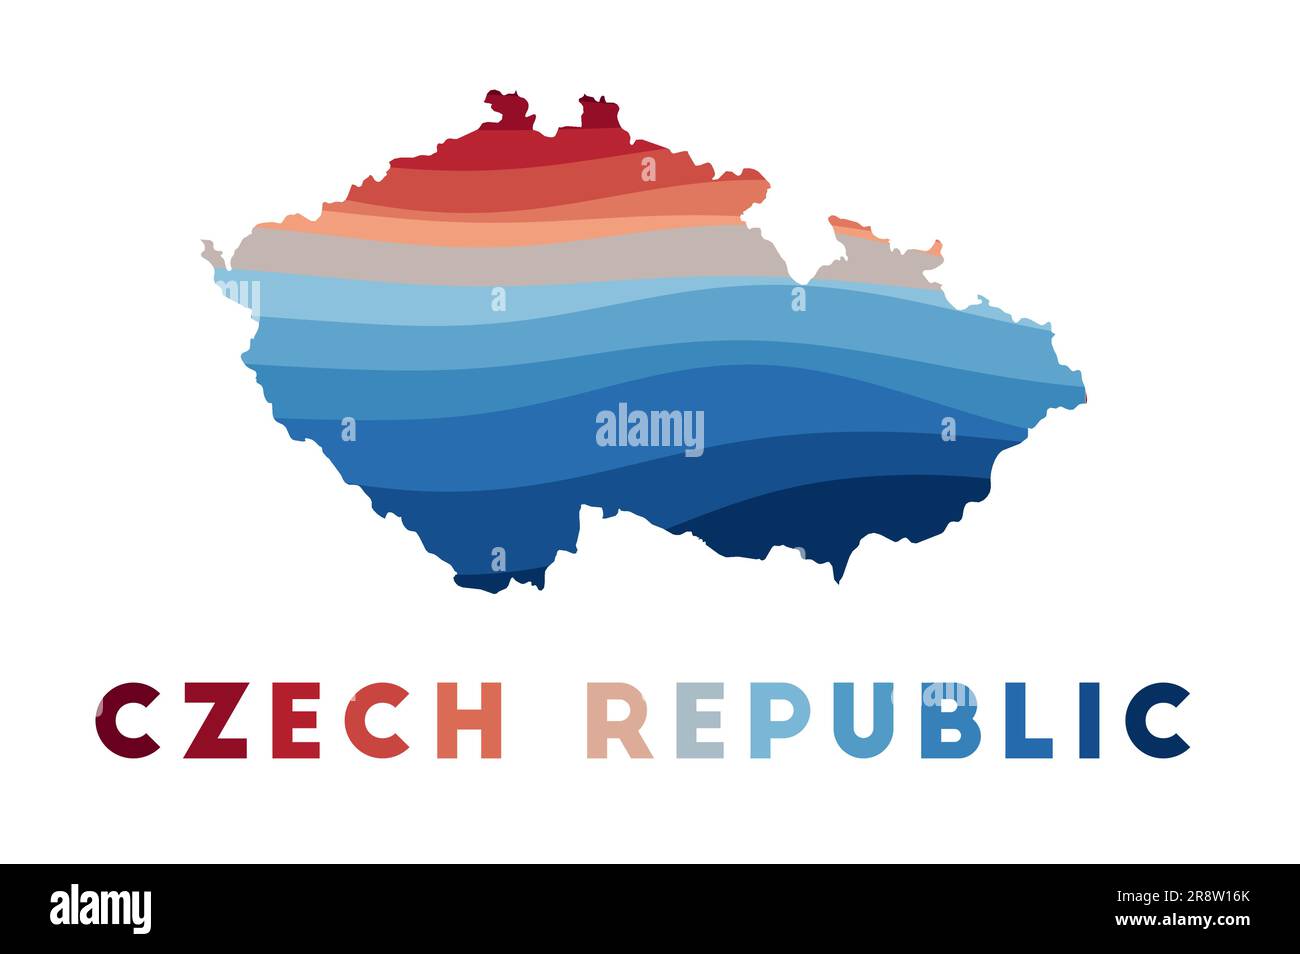 Czech Republic map. Map of the country with beautiful geometric waves in red blue colors. Vivid Czech Republic shape. Vector illustration. Stock Vector